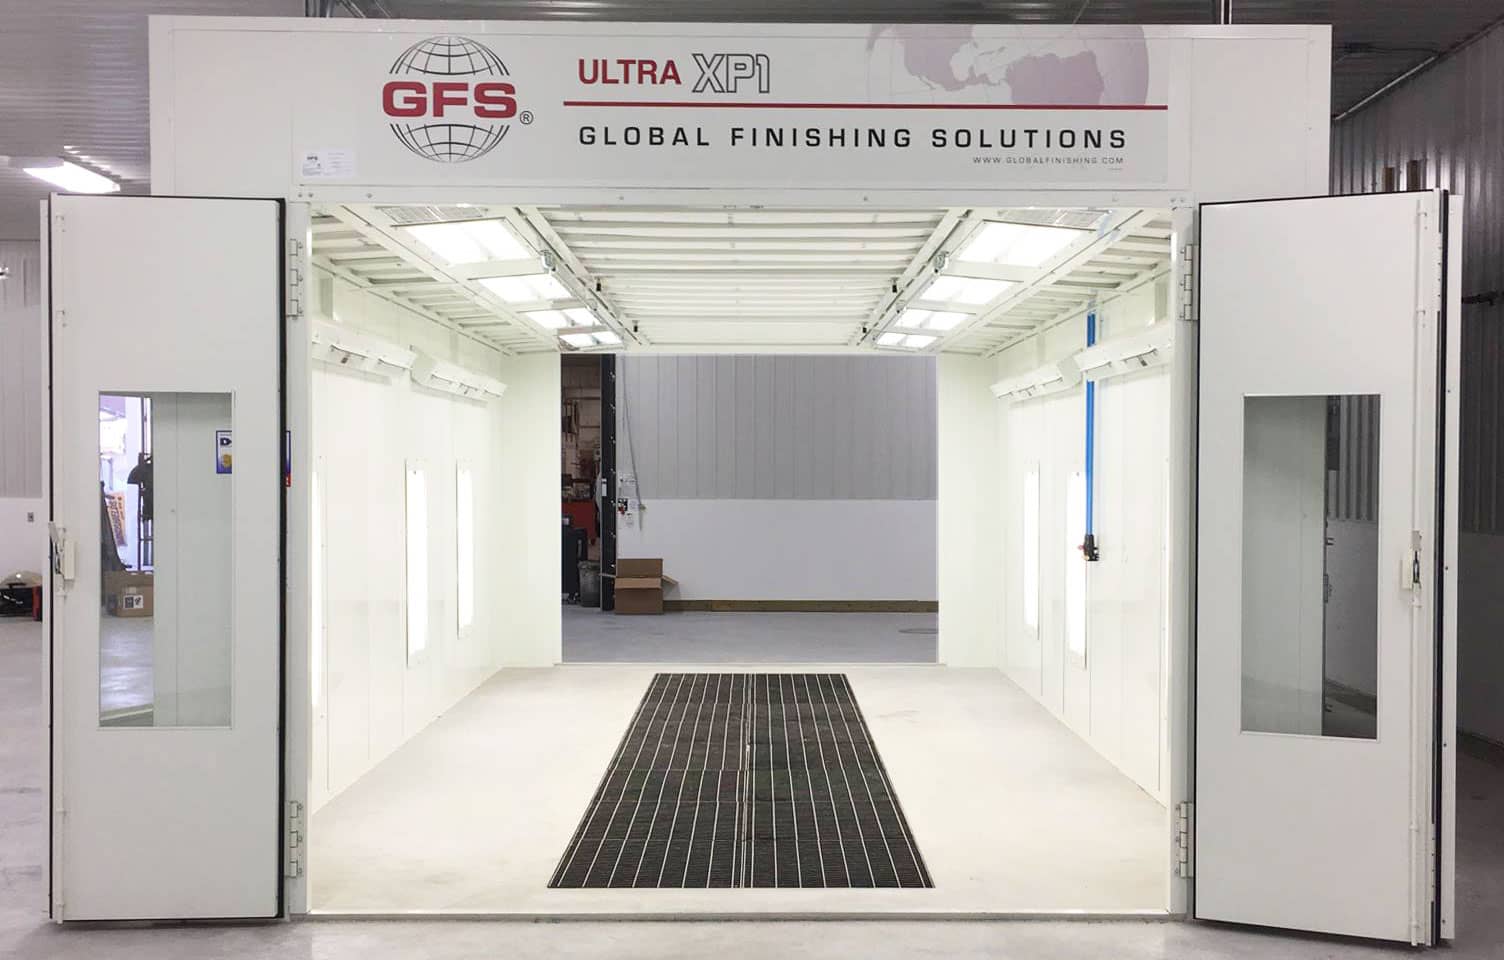 Global Finishing Solutions Ultra XP1 paint booth